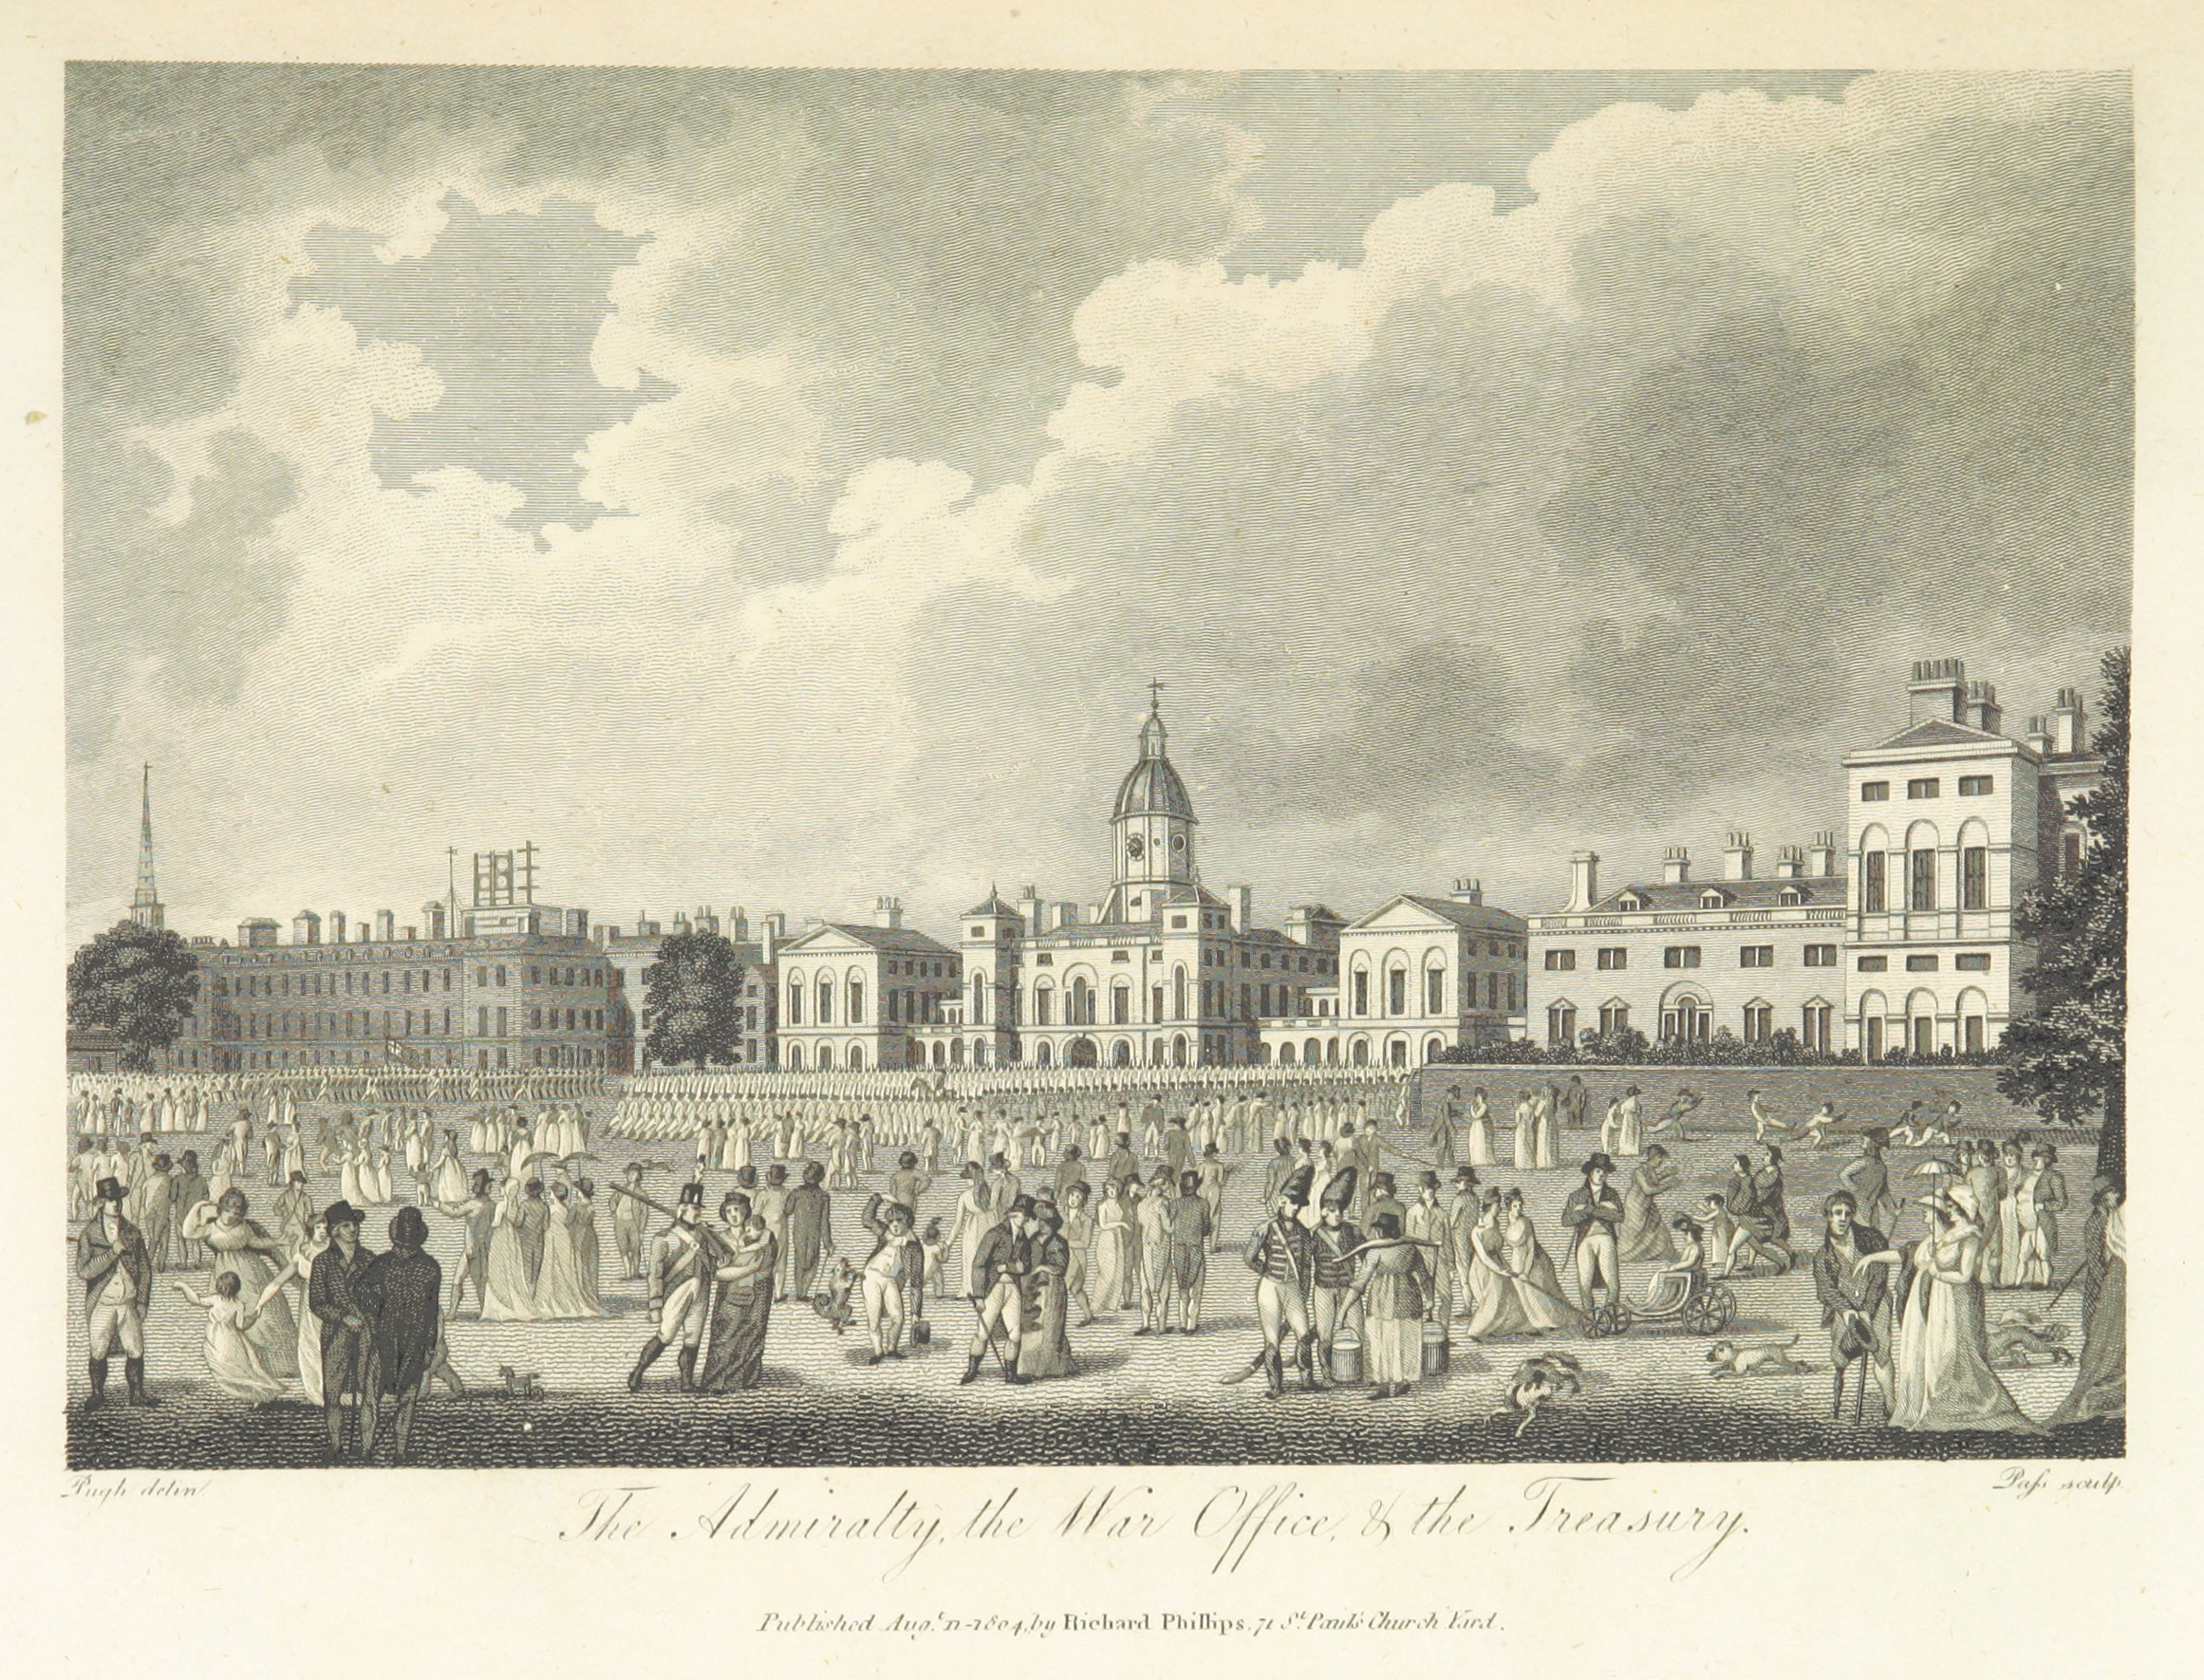 Phillips(1804)_p281_-_The_Admiralty,_the_War_Office_and_the_Treasury